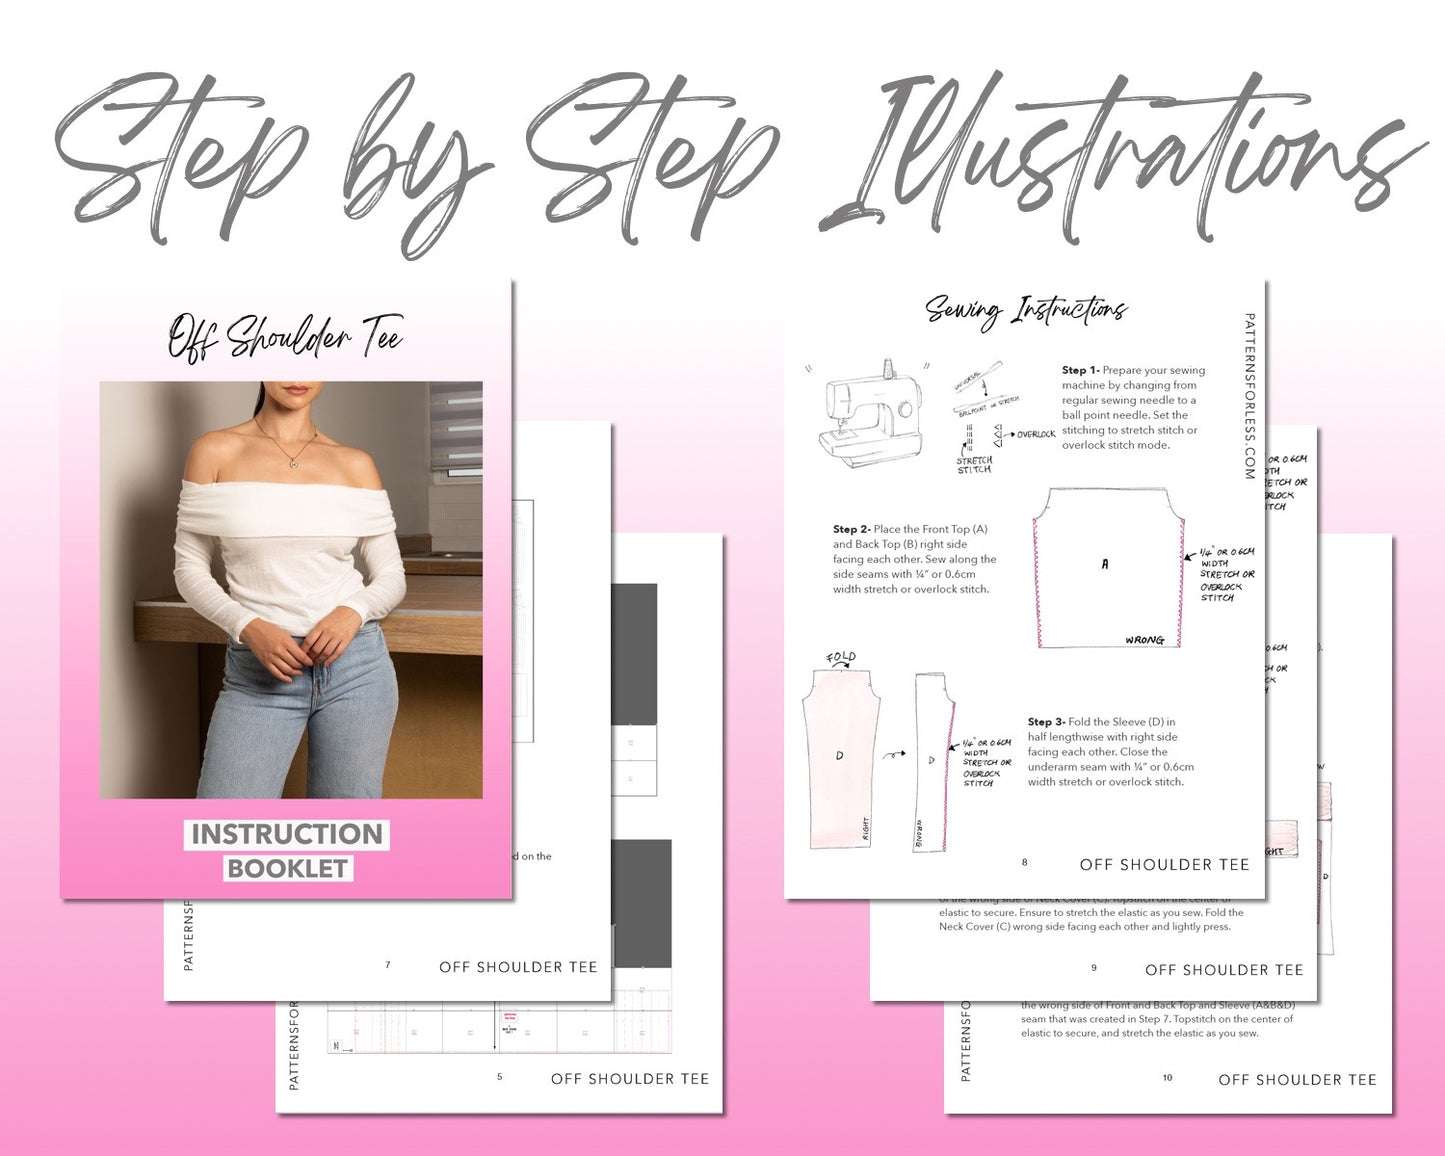 Off Shoulder Tee sewing pattern step by step illustrations.